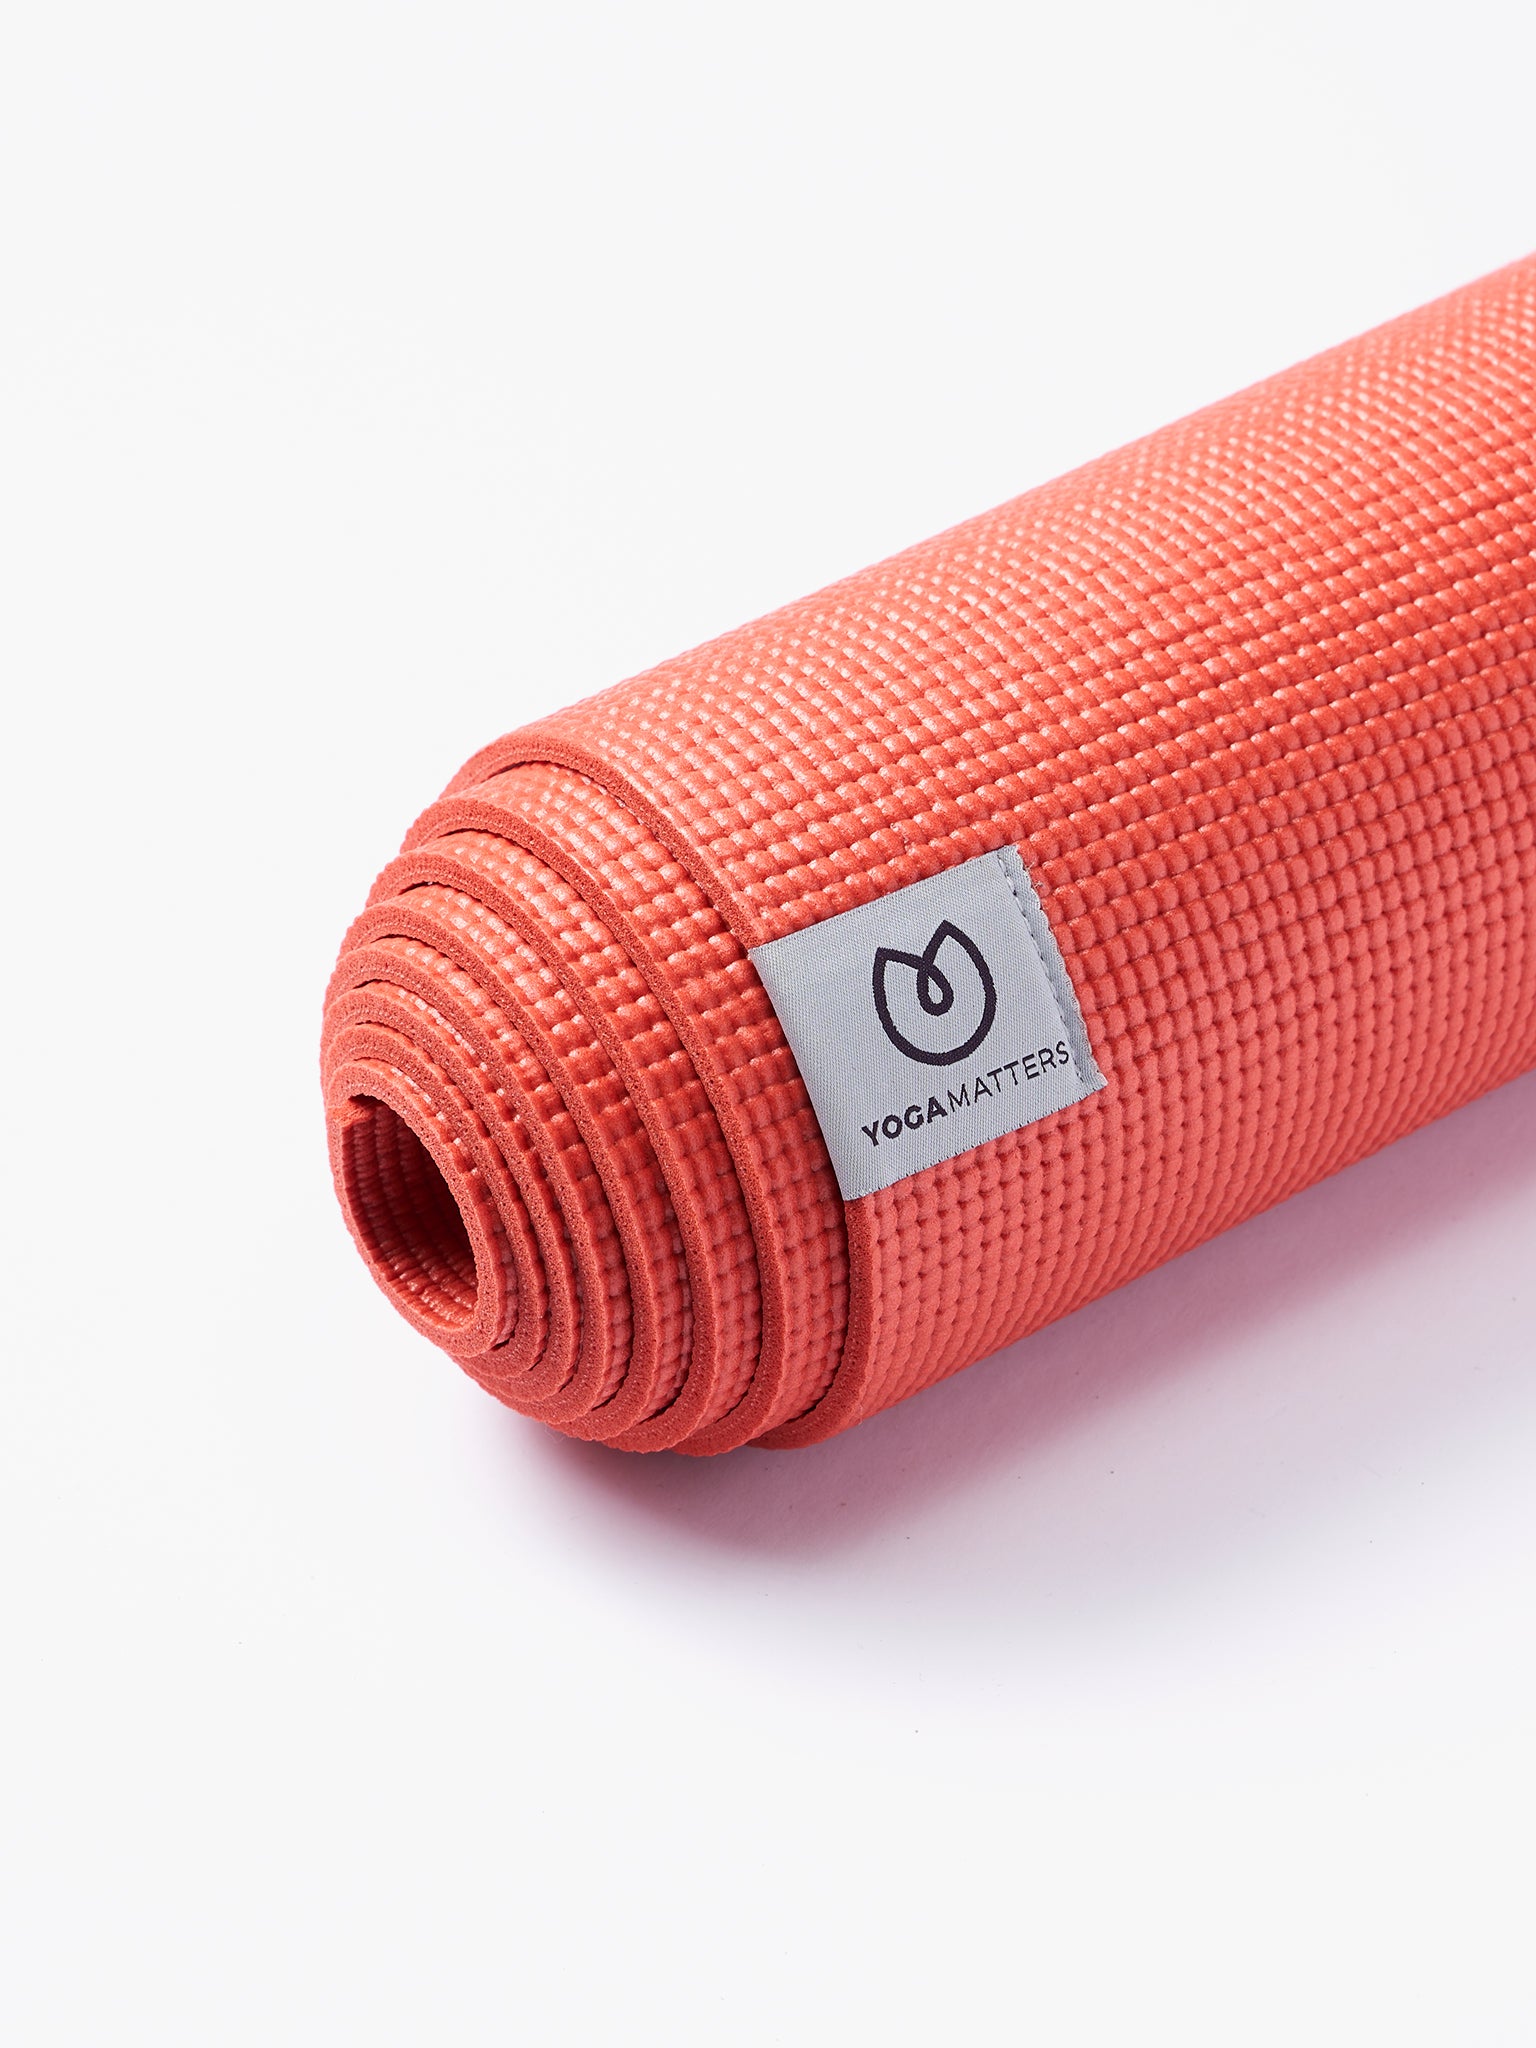 Coral red YogaMatters yoga mat rolled up side view with textured surface on a white background